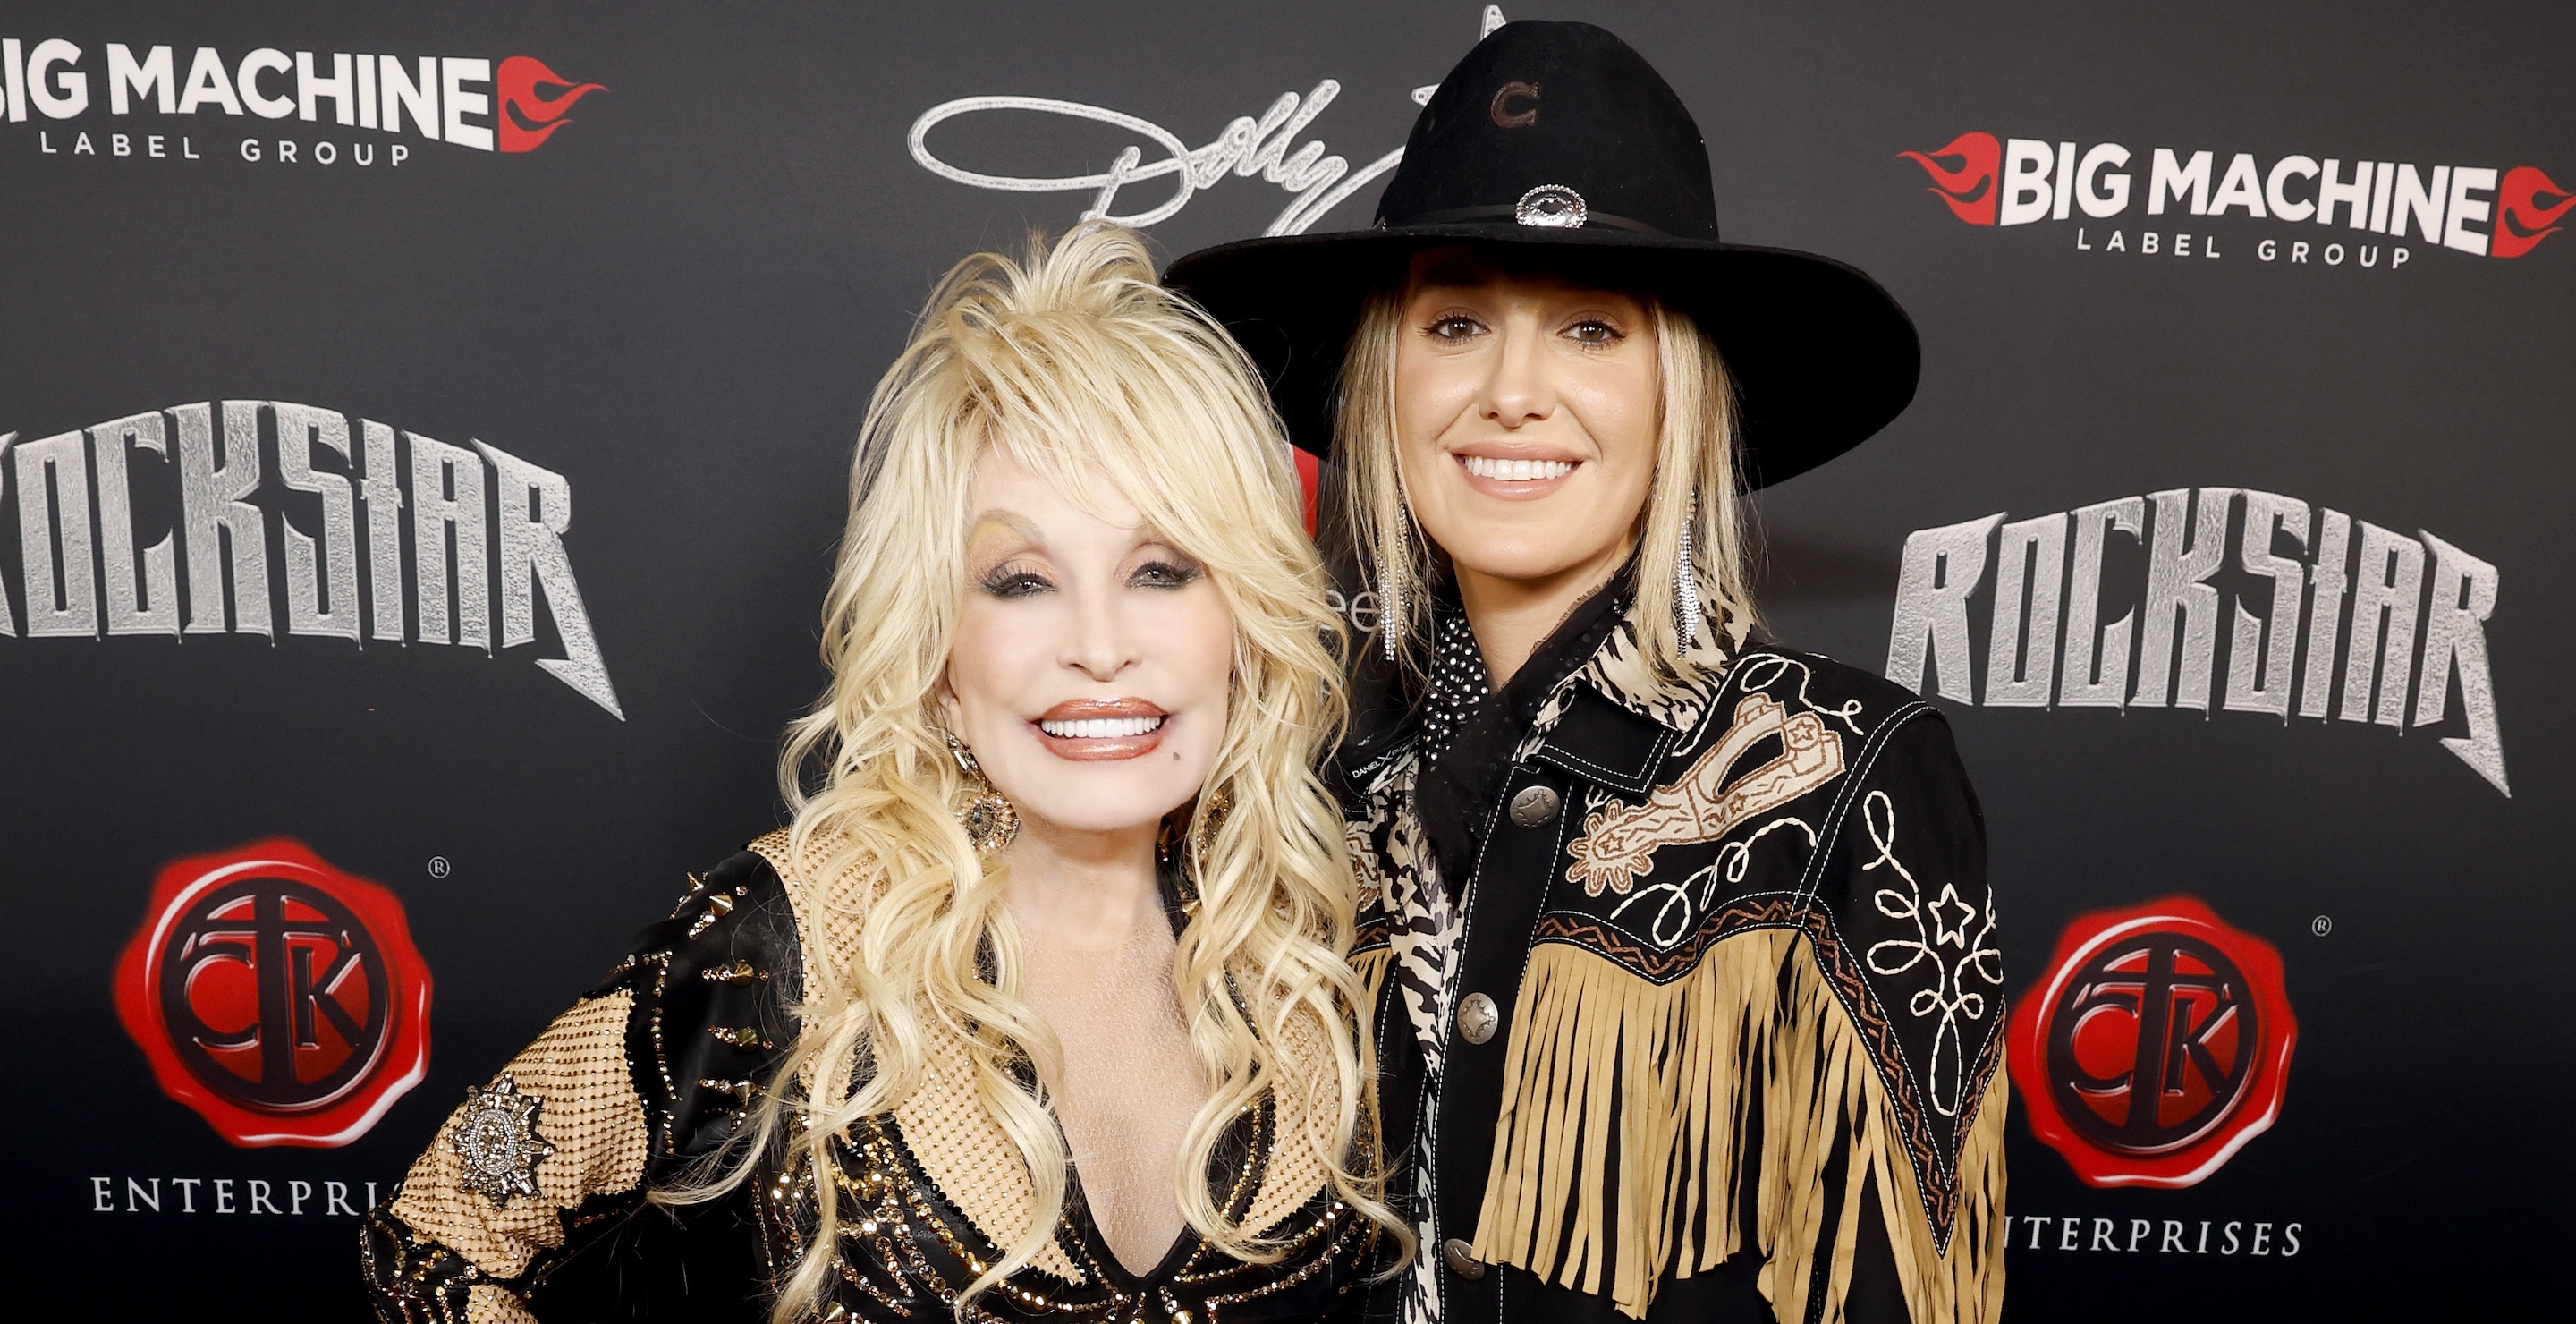 NASHVILLE, TENNESSEE - NOVEMBER 16:  (EDITORS NOTE: This image has been retouched.) (L-R) Dolly Parton and Lainey Wilson attend Dolly Parton's Rockstar VIP Album Release Party with American Greetings on November 16, 2023 in Nashville, Tennessee.